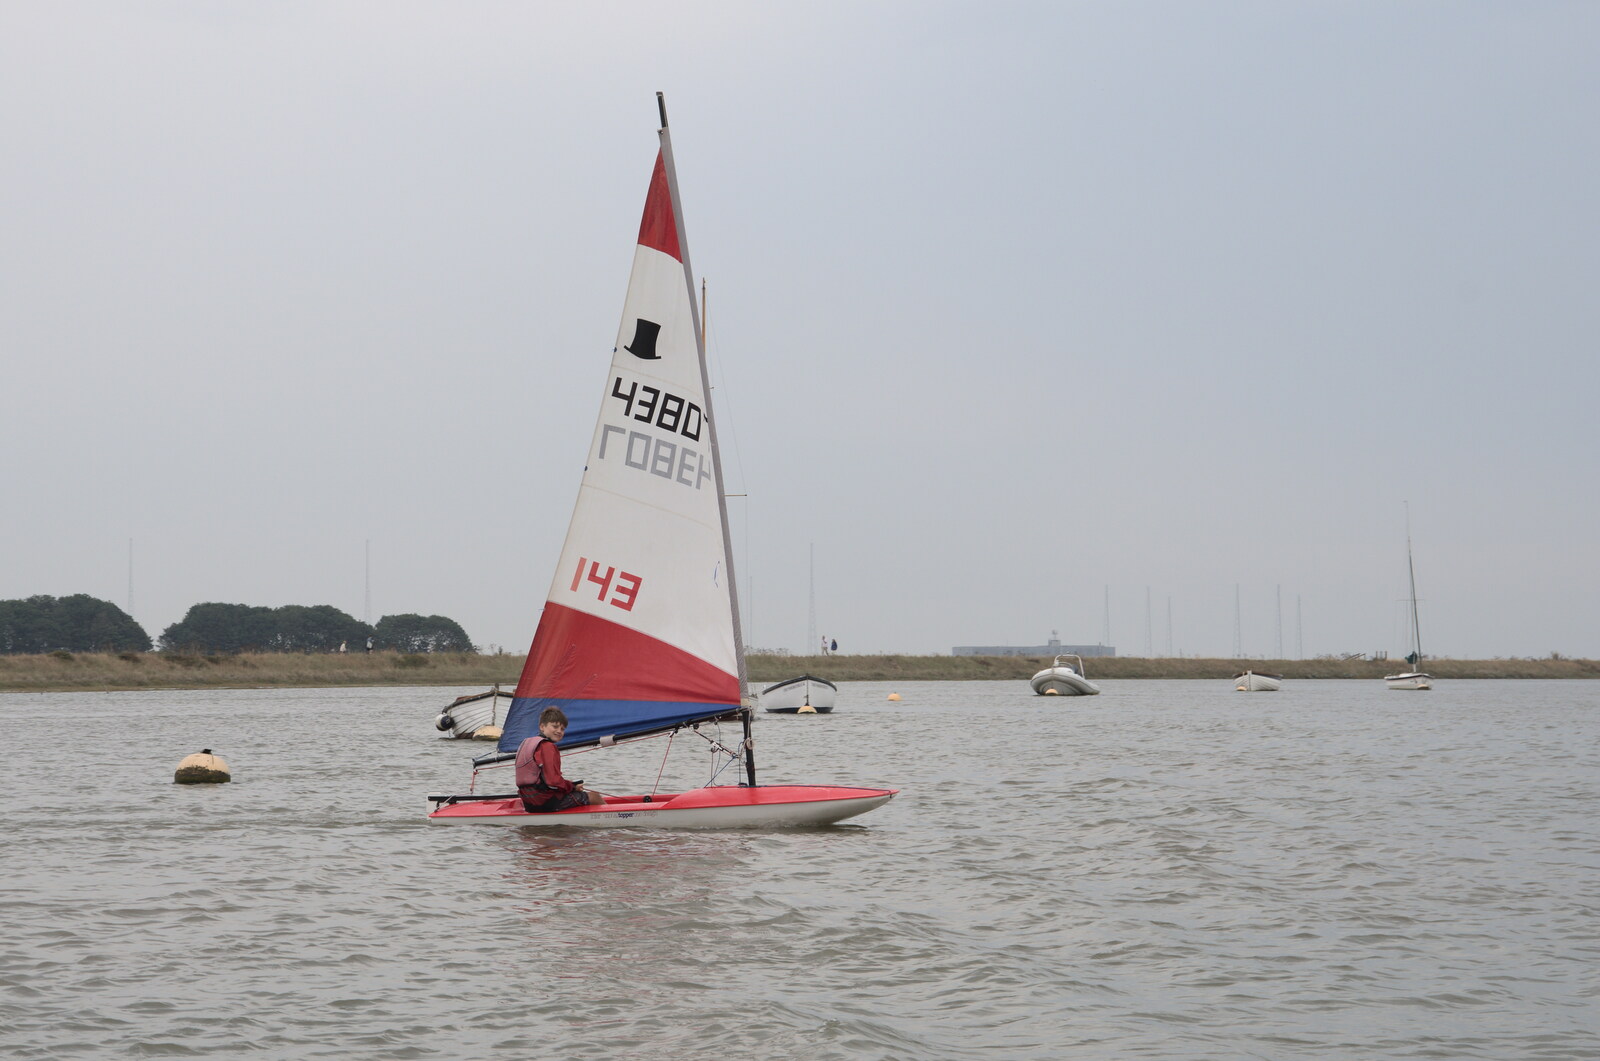 A boy sails a Topper across the river from A Trip to Orford Ness, Orford, Suffolk - 16th August 2022